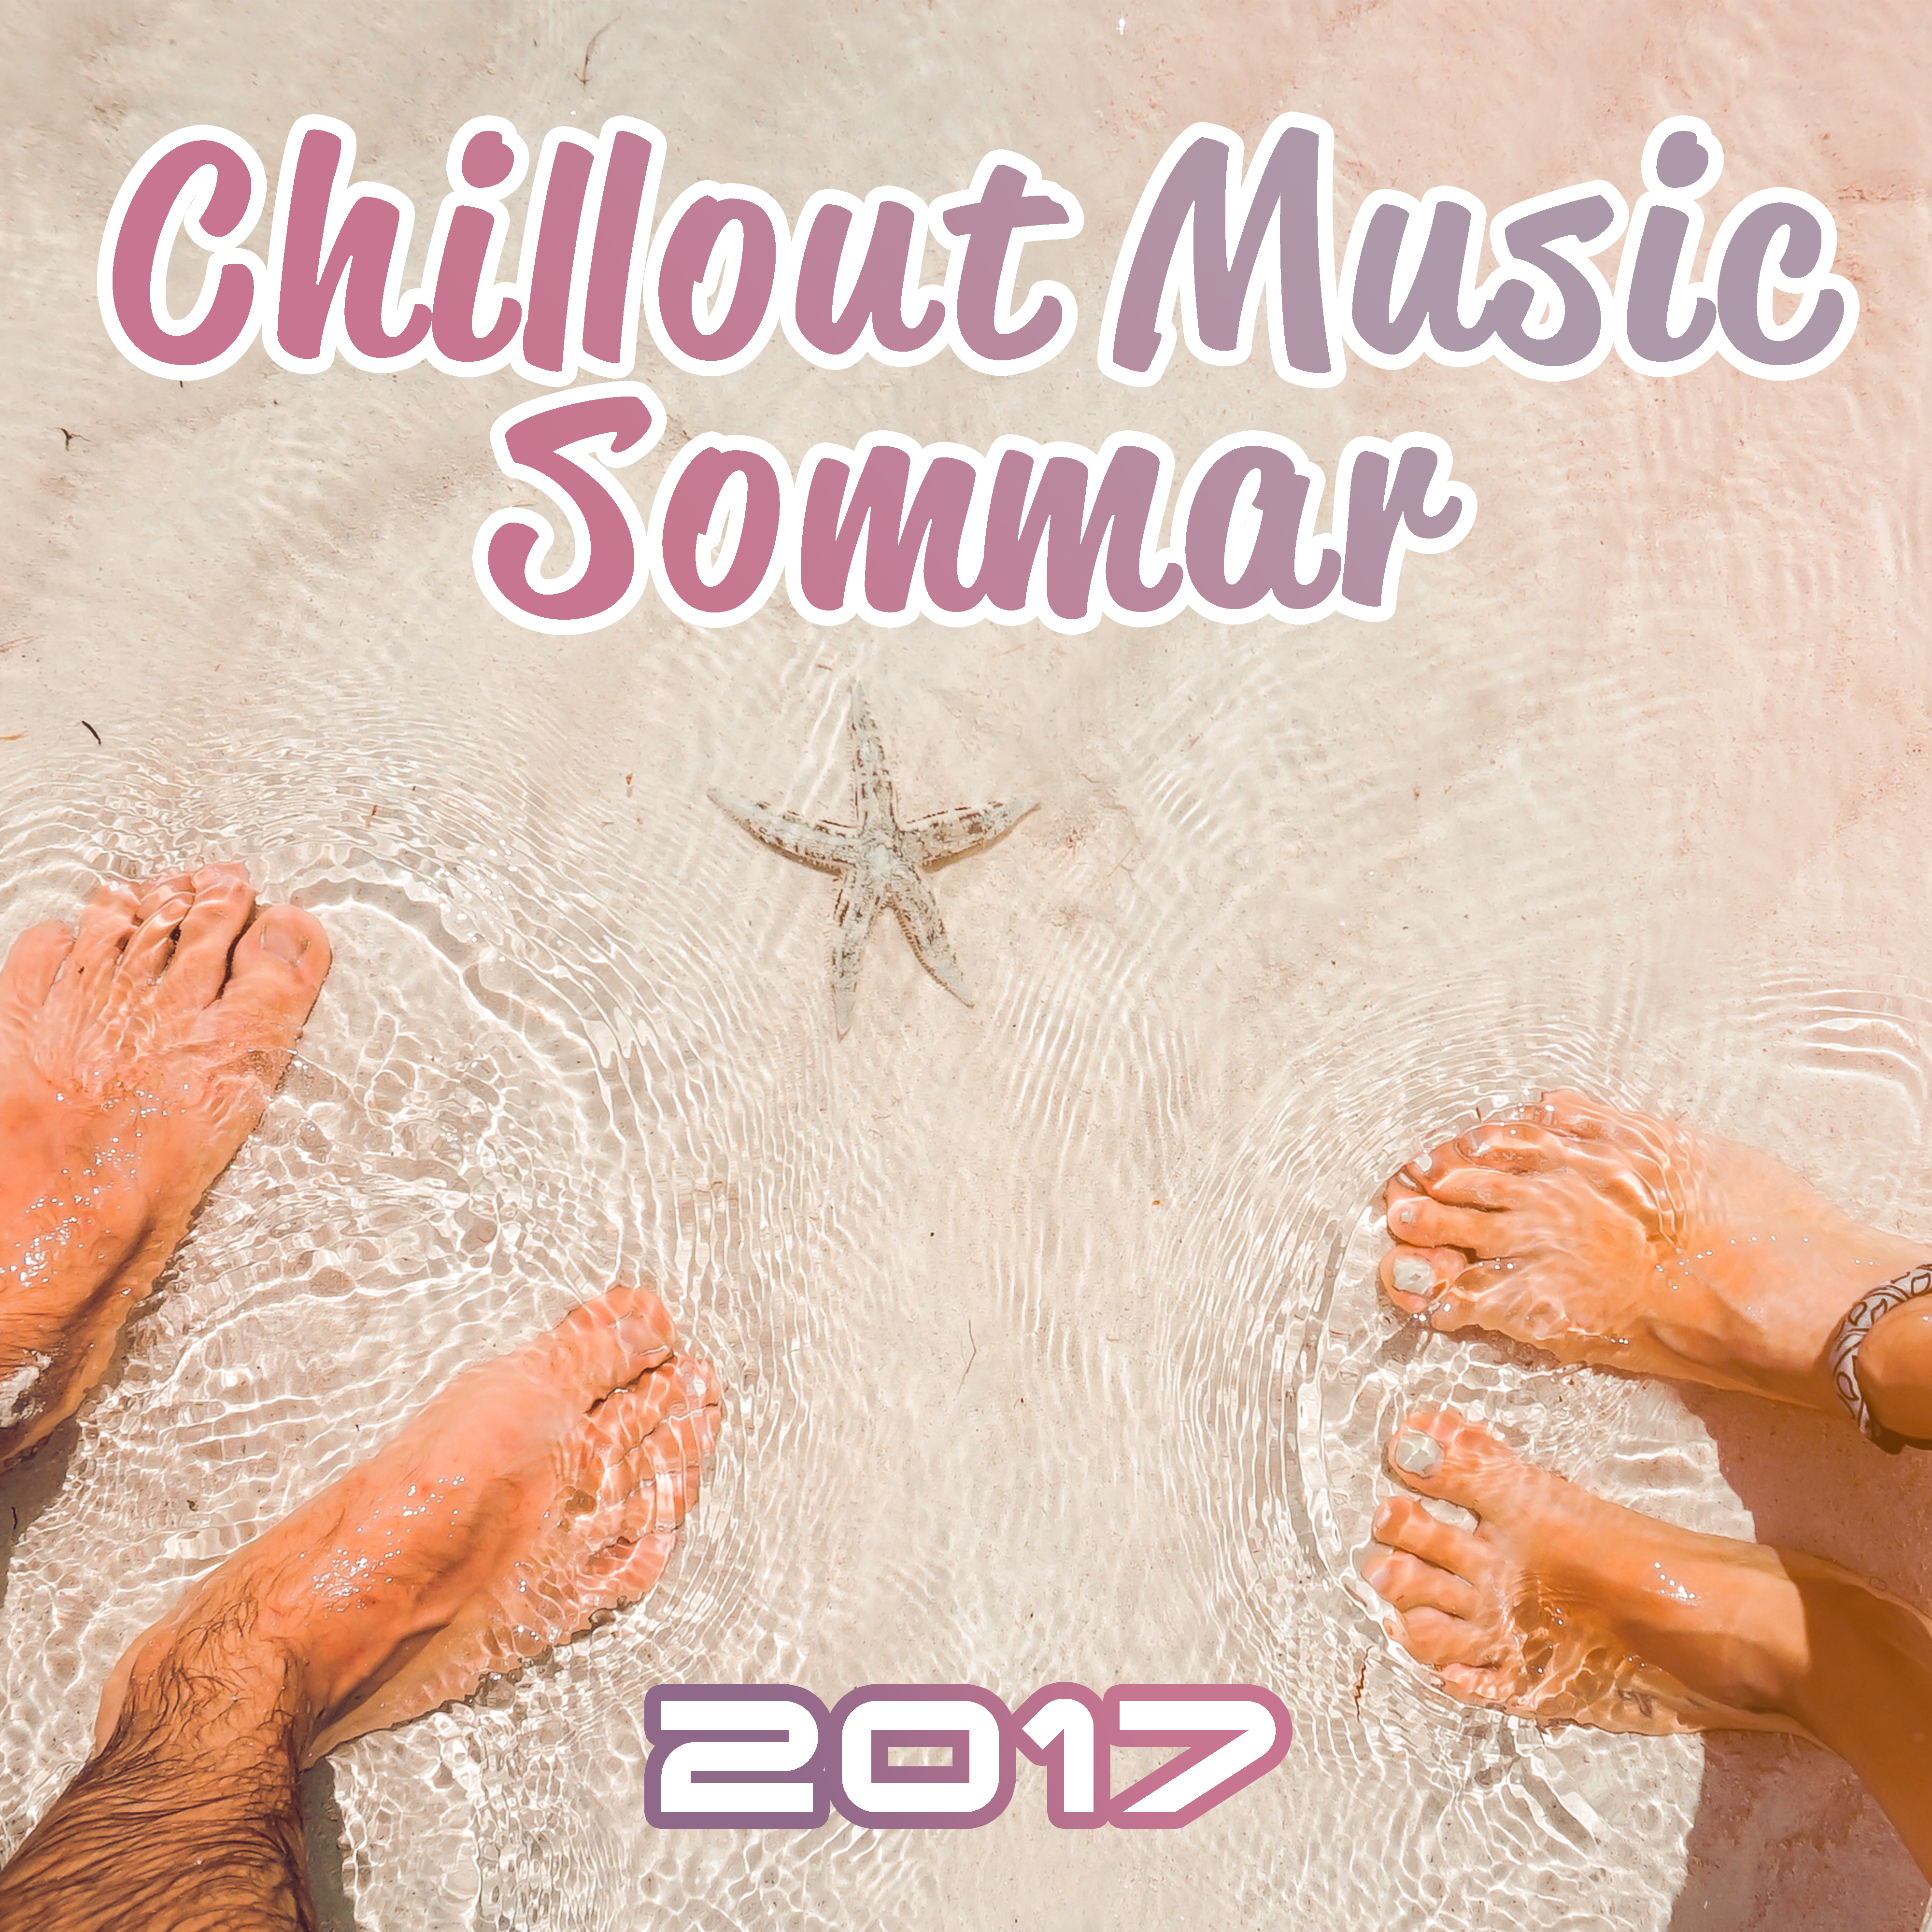 Chillout Music Sommar 2017 – Chill Out 2017, Summer Lounge, Electronic Beats, Chillout 69